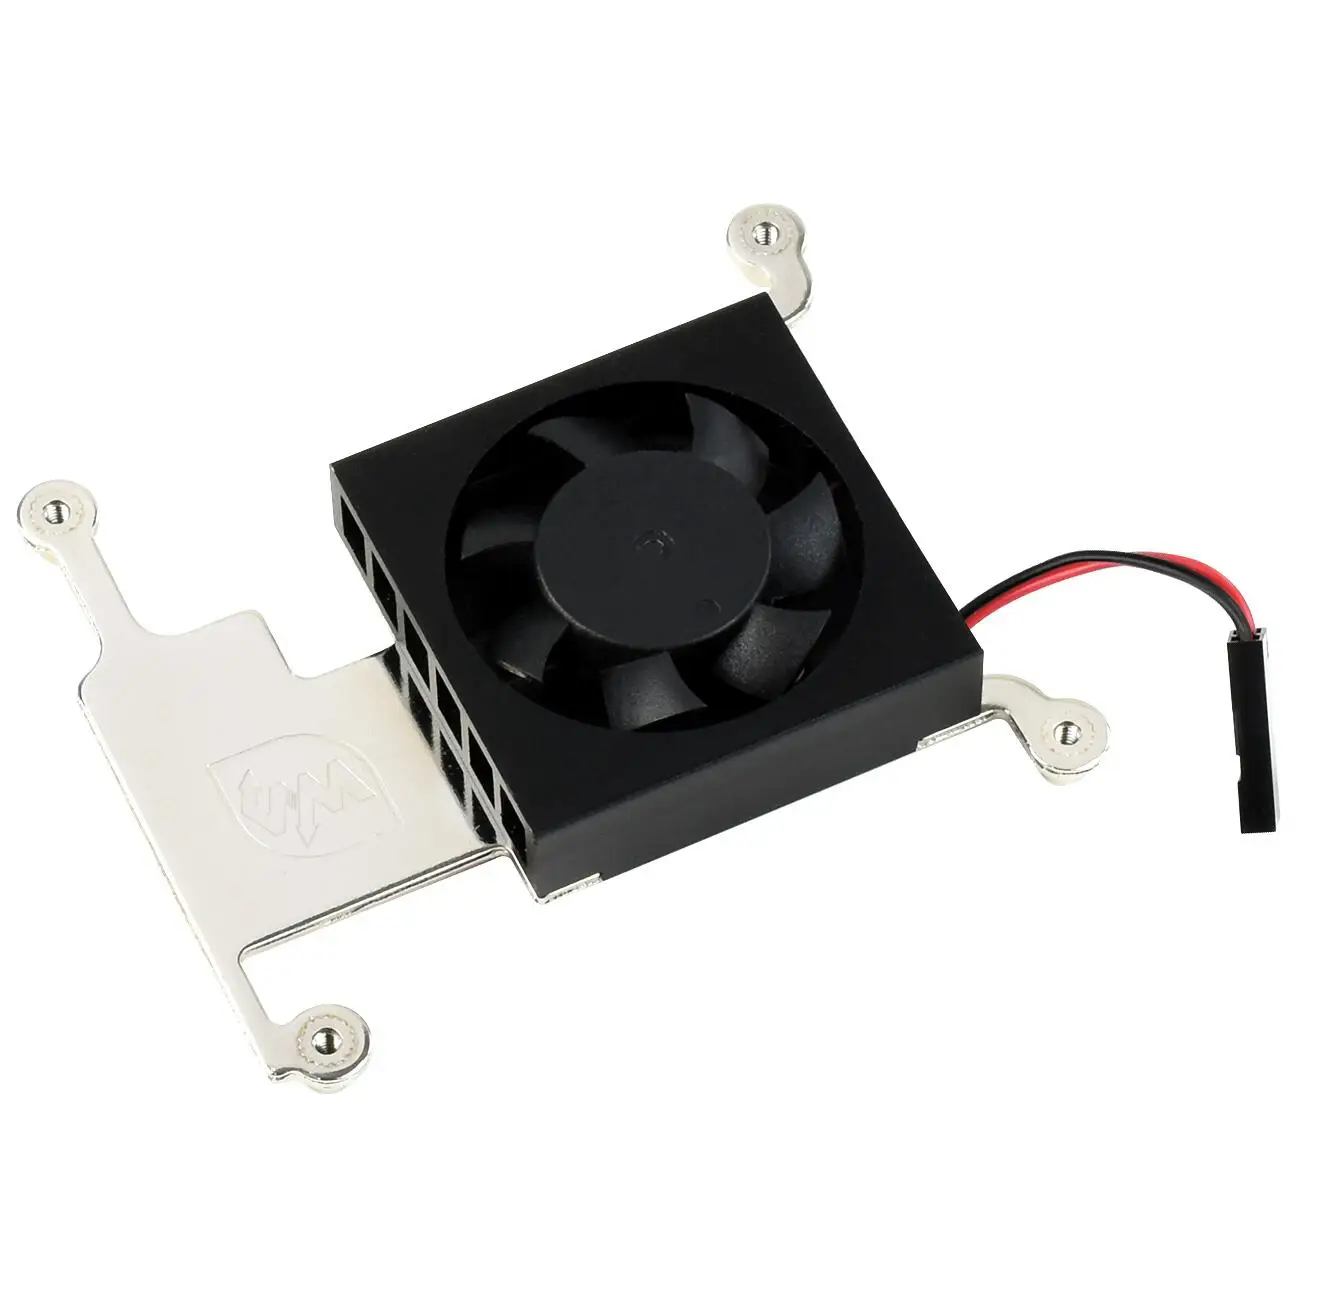 

Waveshare New Arrival Low Profile CPU Cooling Fan with Aluminum Alloy Bracket for Raspberry Pi 4B 3B+ 3B